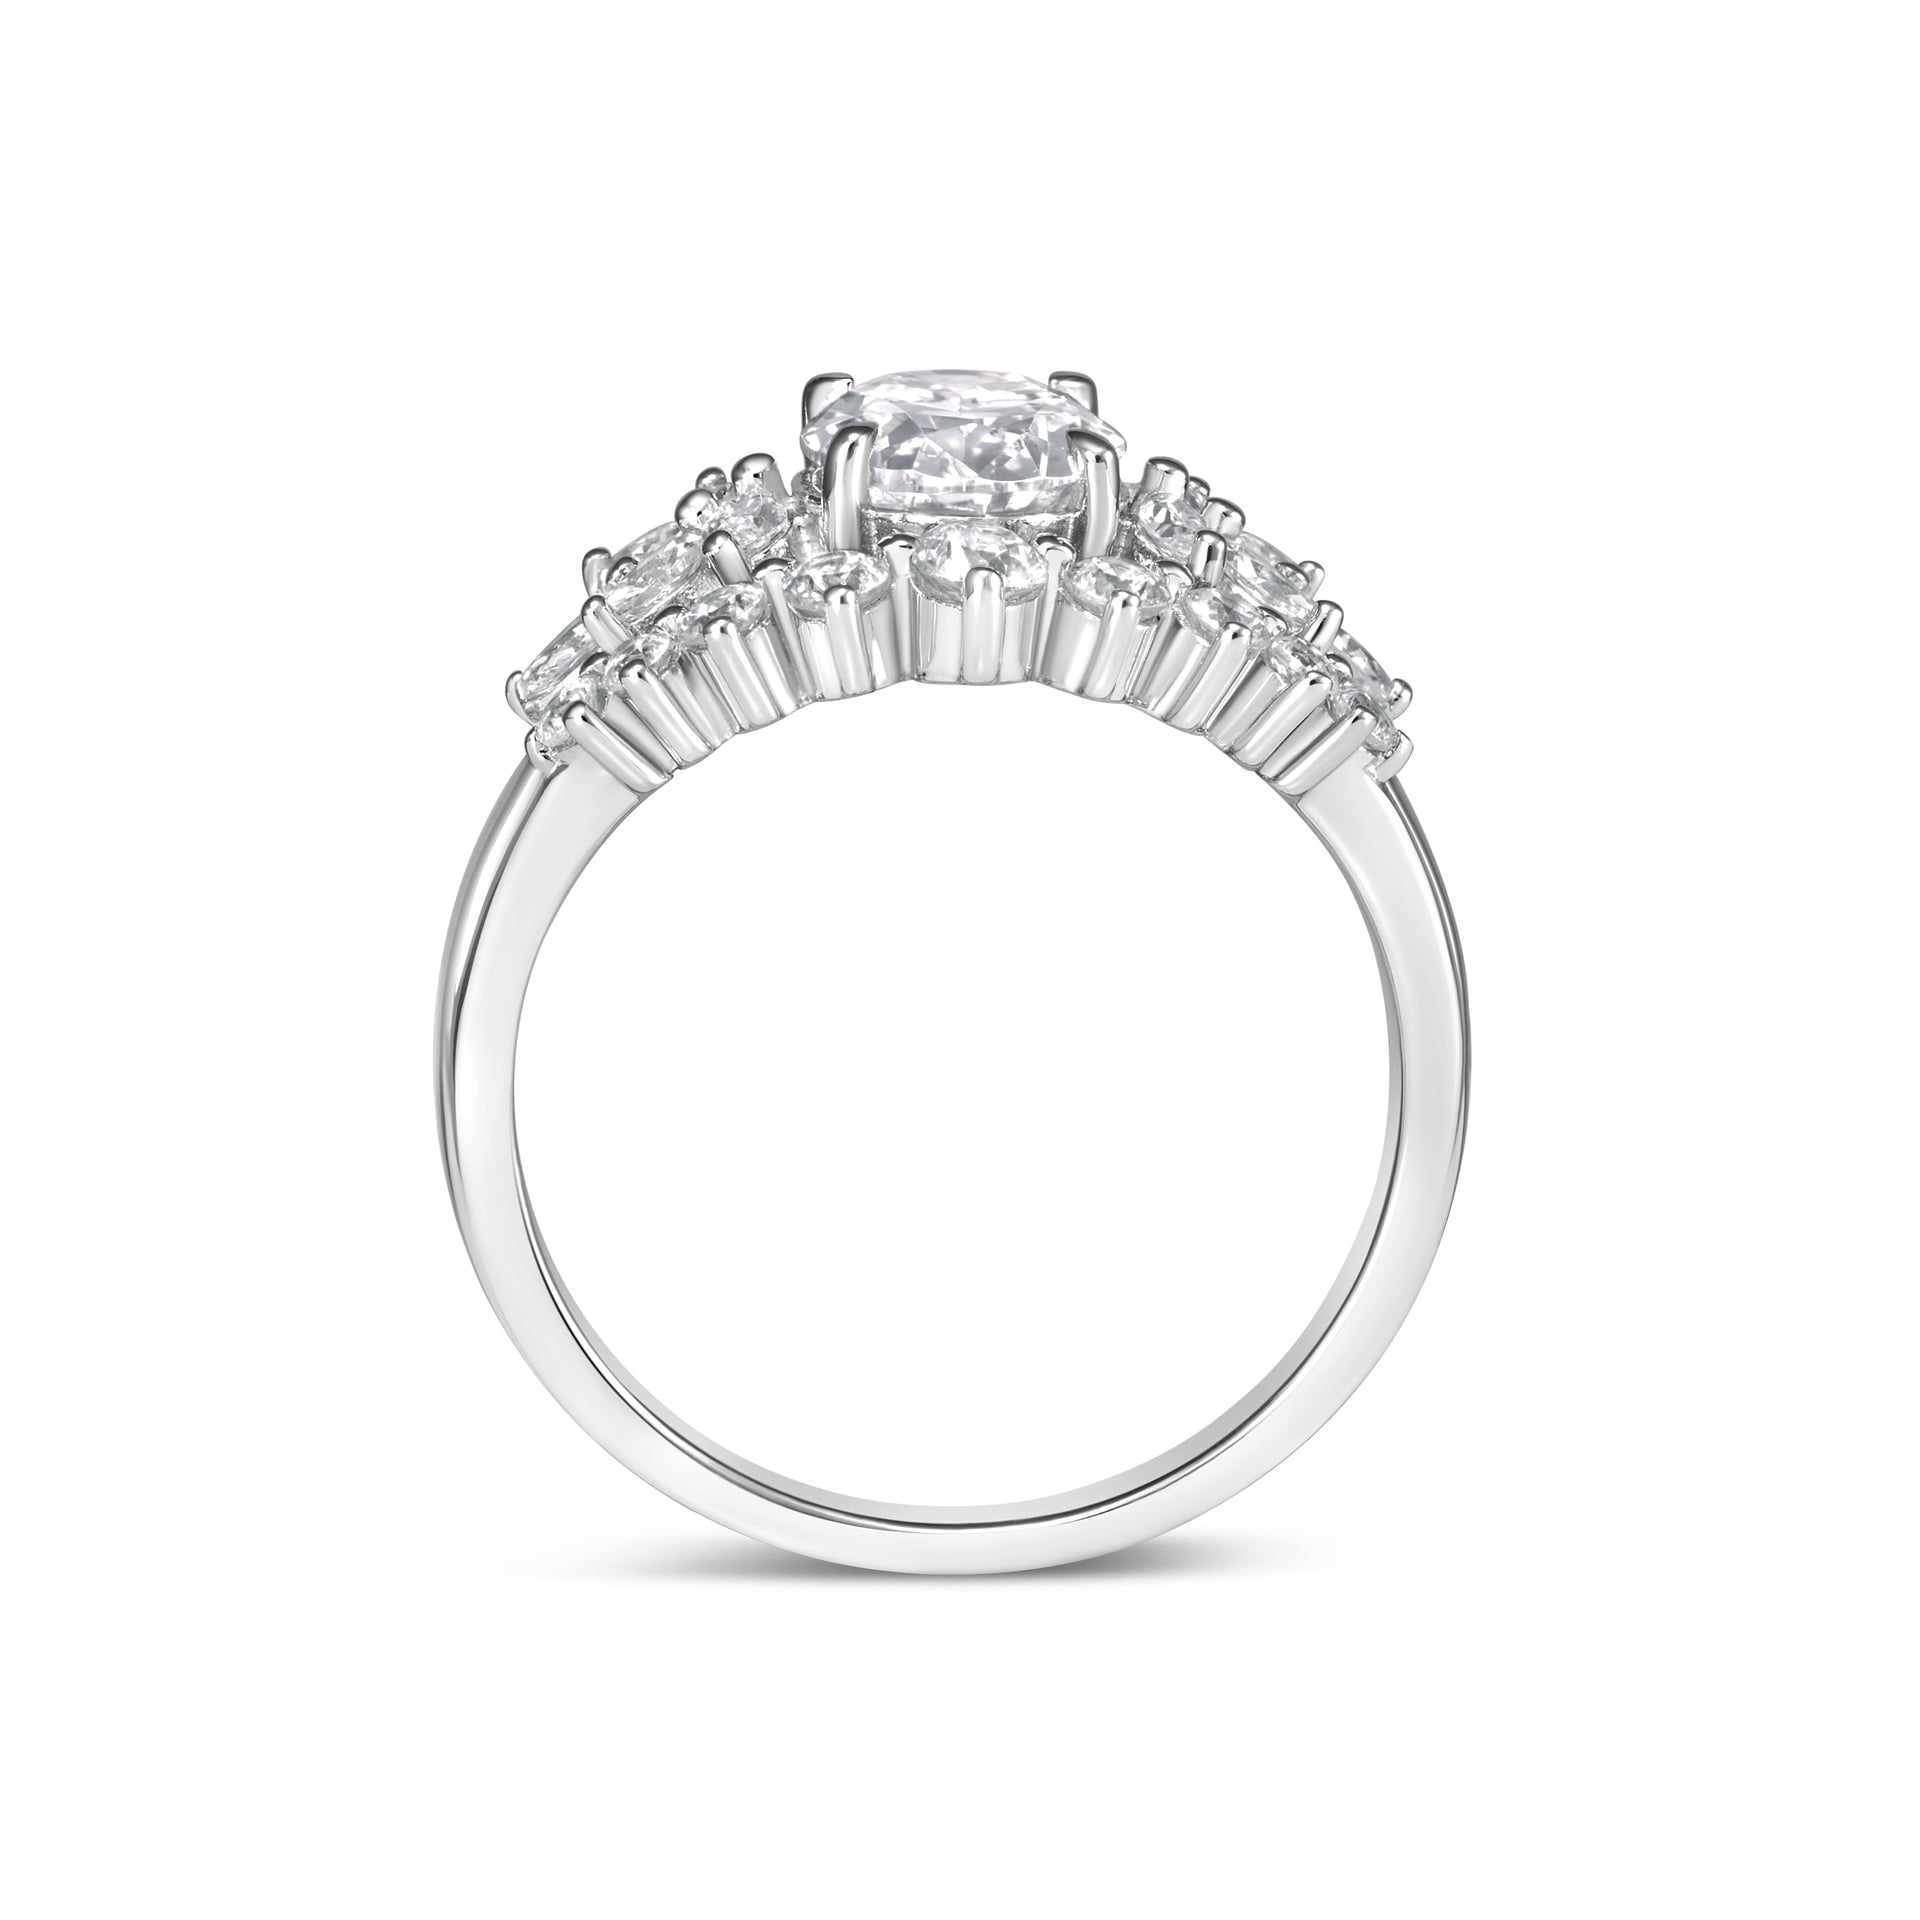 Modern vintage engagement ring with marquise and round side stones.